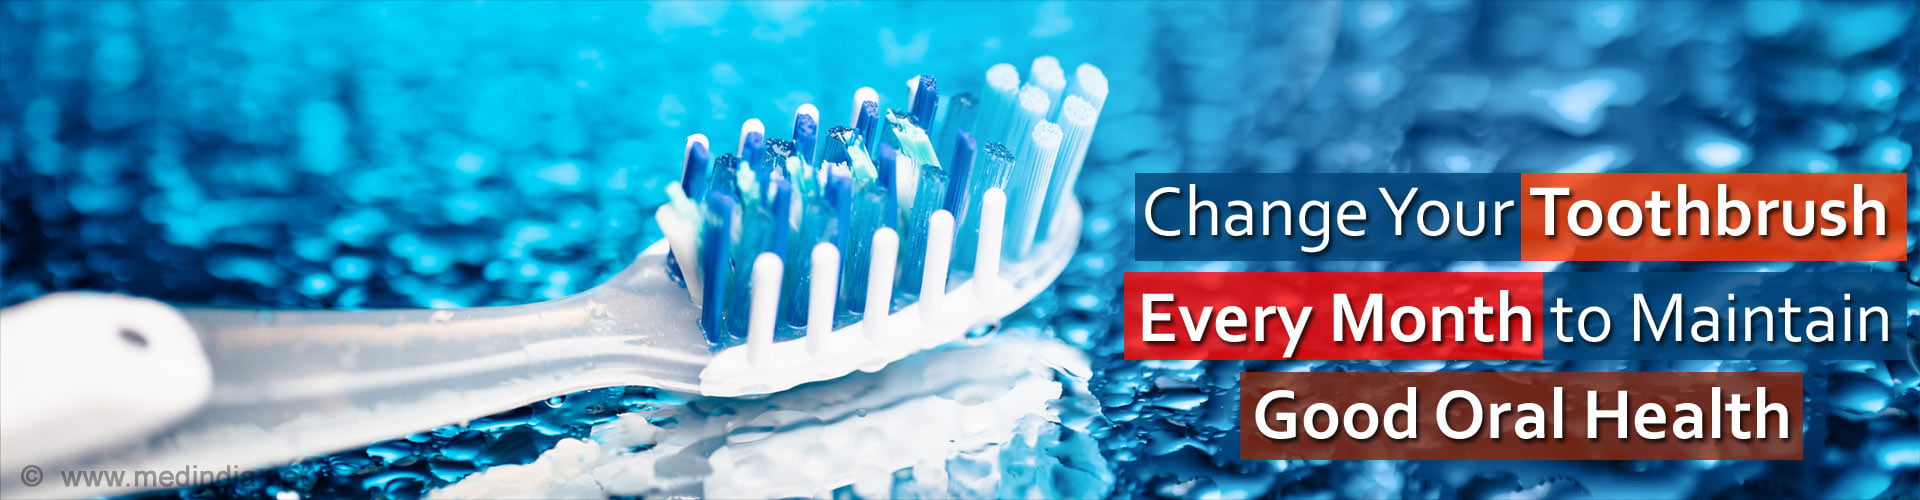 Change Your Toothbrush Every Month to Maintain Good Oral Health